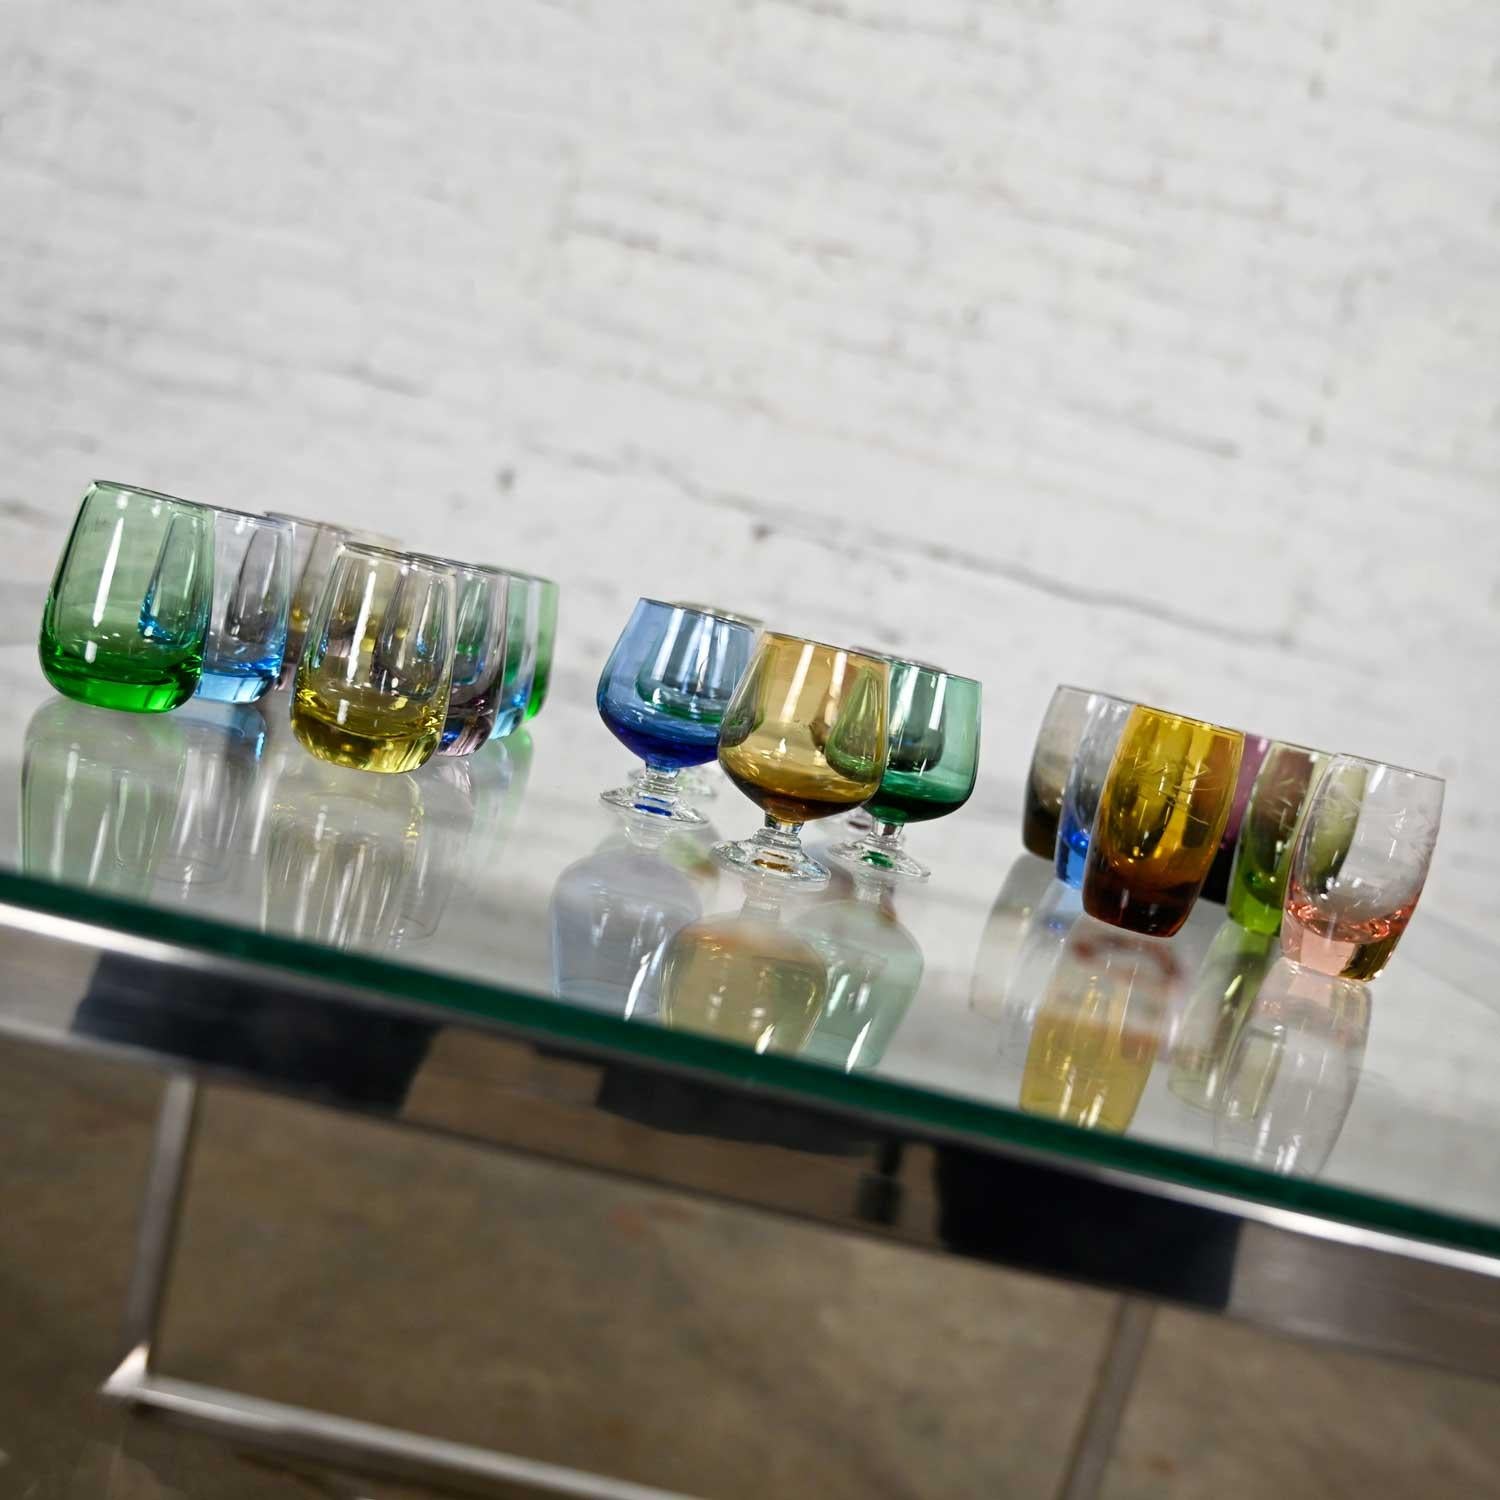 Fabulous vintage set of 21 blown glass multi-colored small cocktail snifters, cordials, or shot glasses in three different sizes. Beautiful condition, keeping in mind that these are vintage and not new so will have signs of use and wear. There is a